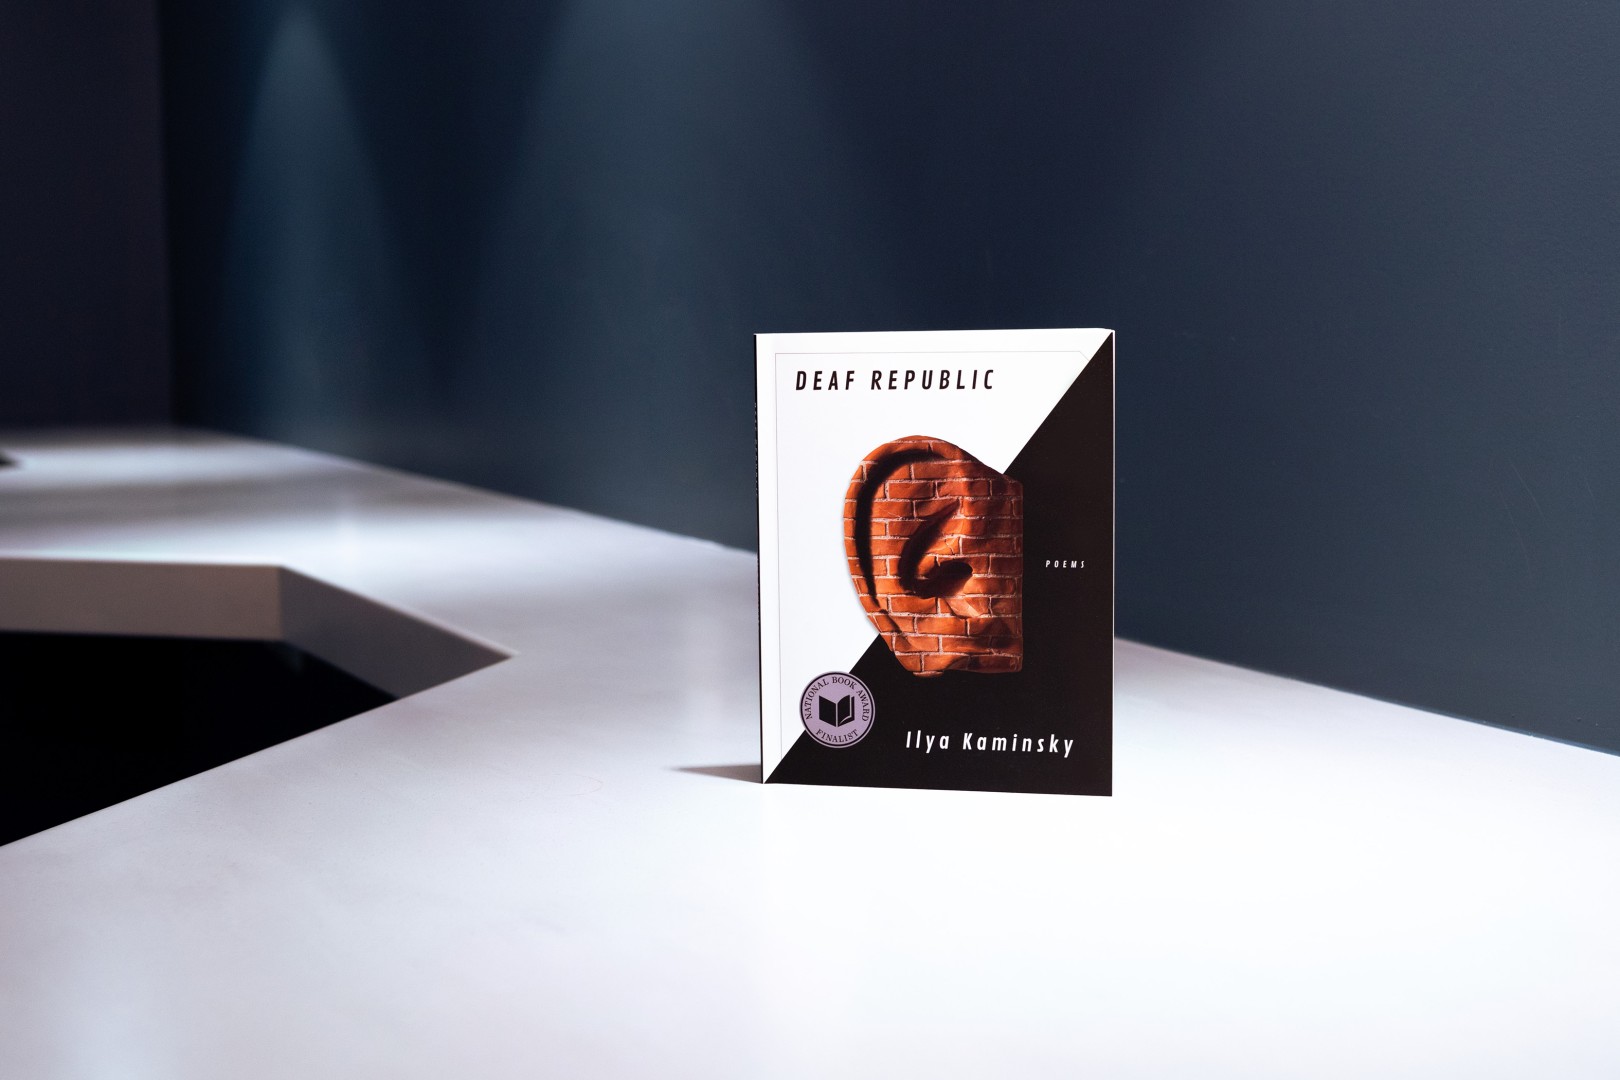 Image of "Deaf Republic" book - black and white color cover with image of an ear in the center.